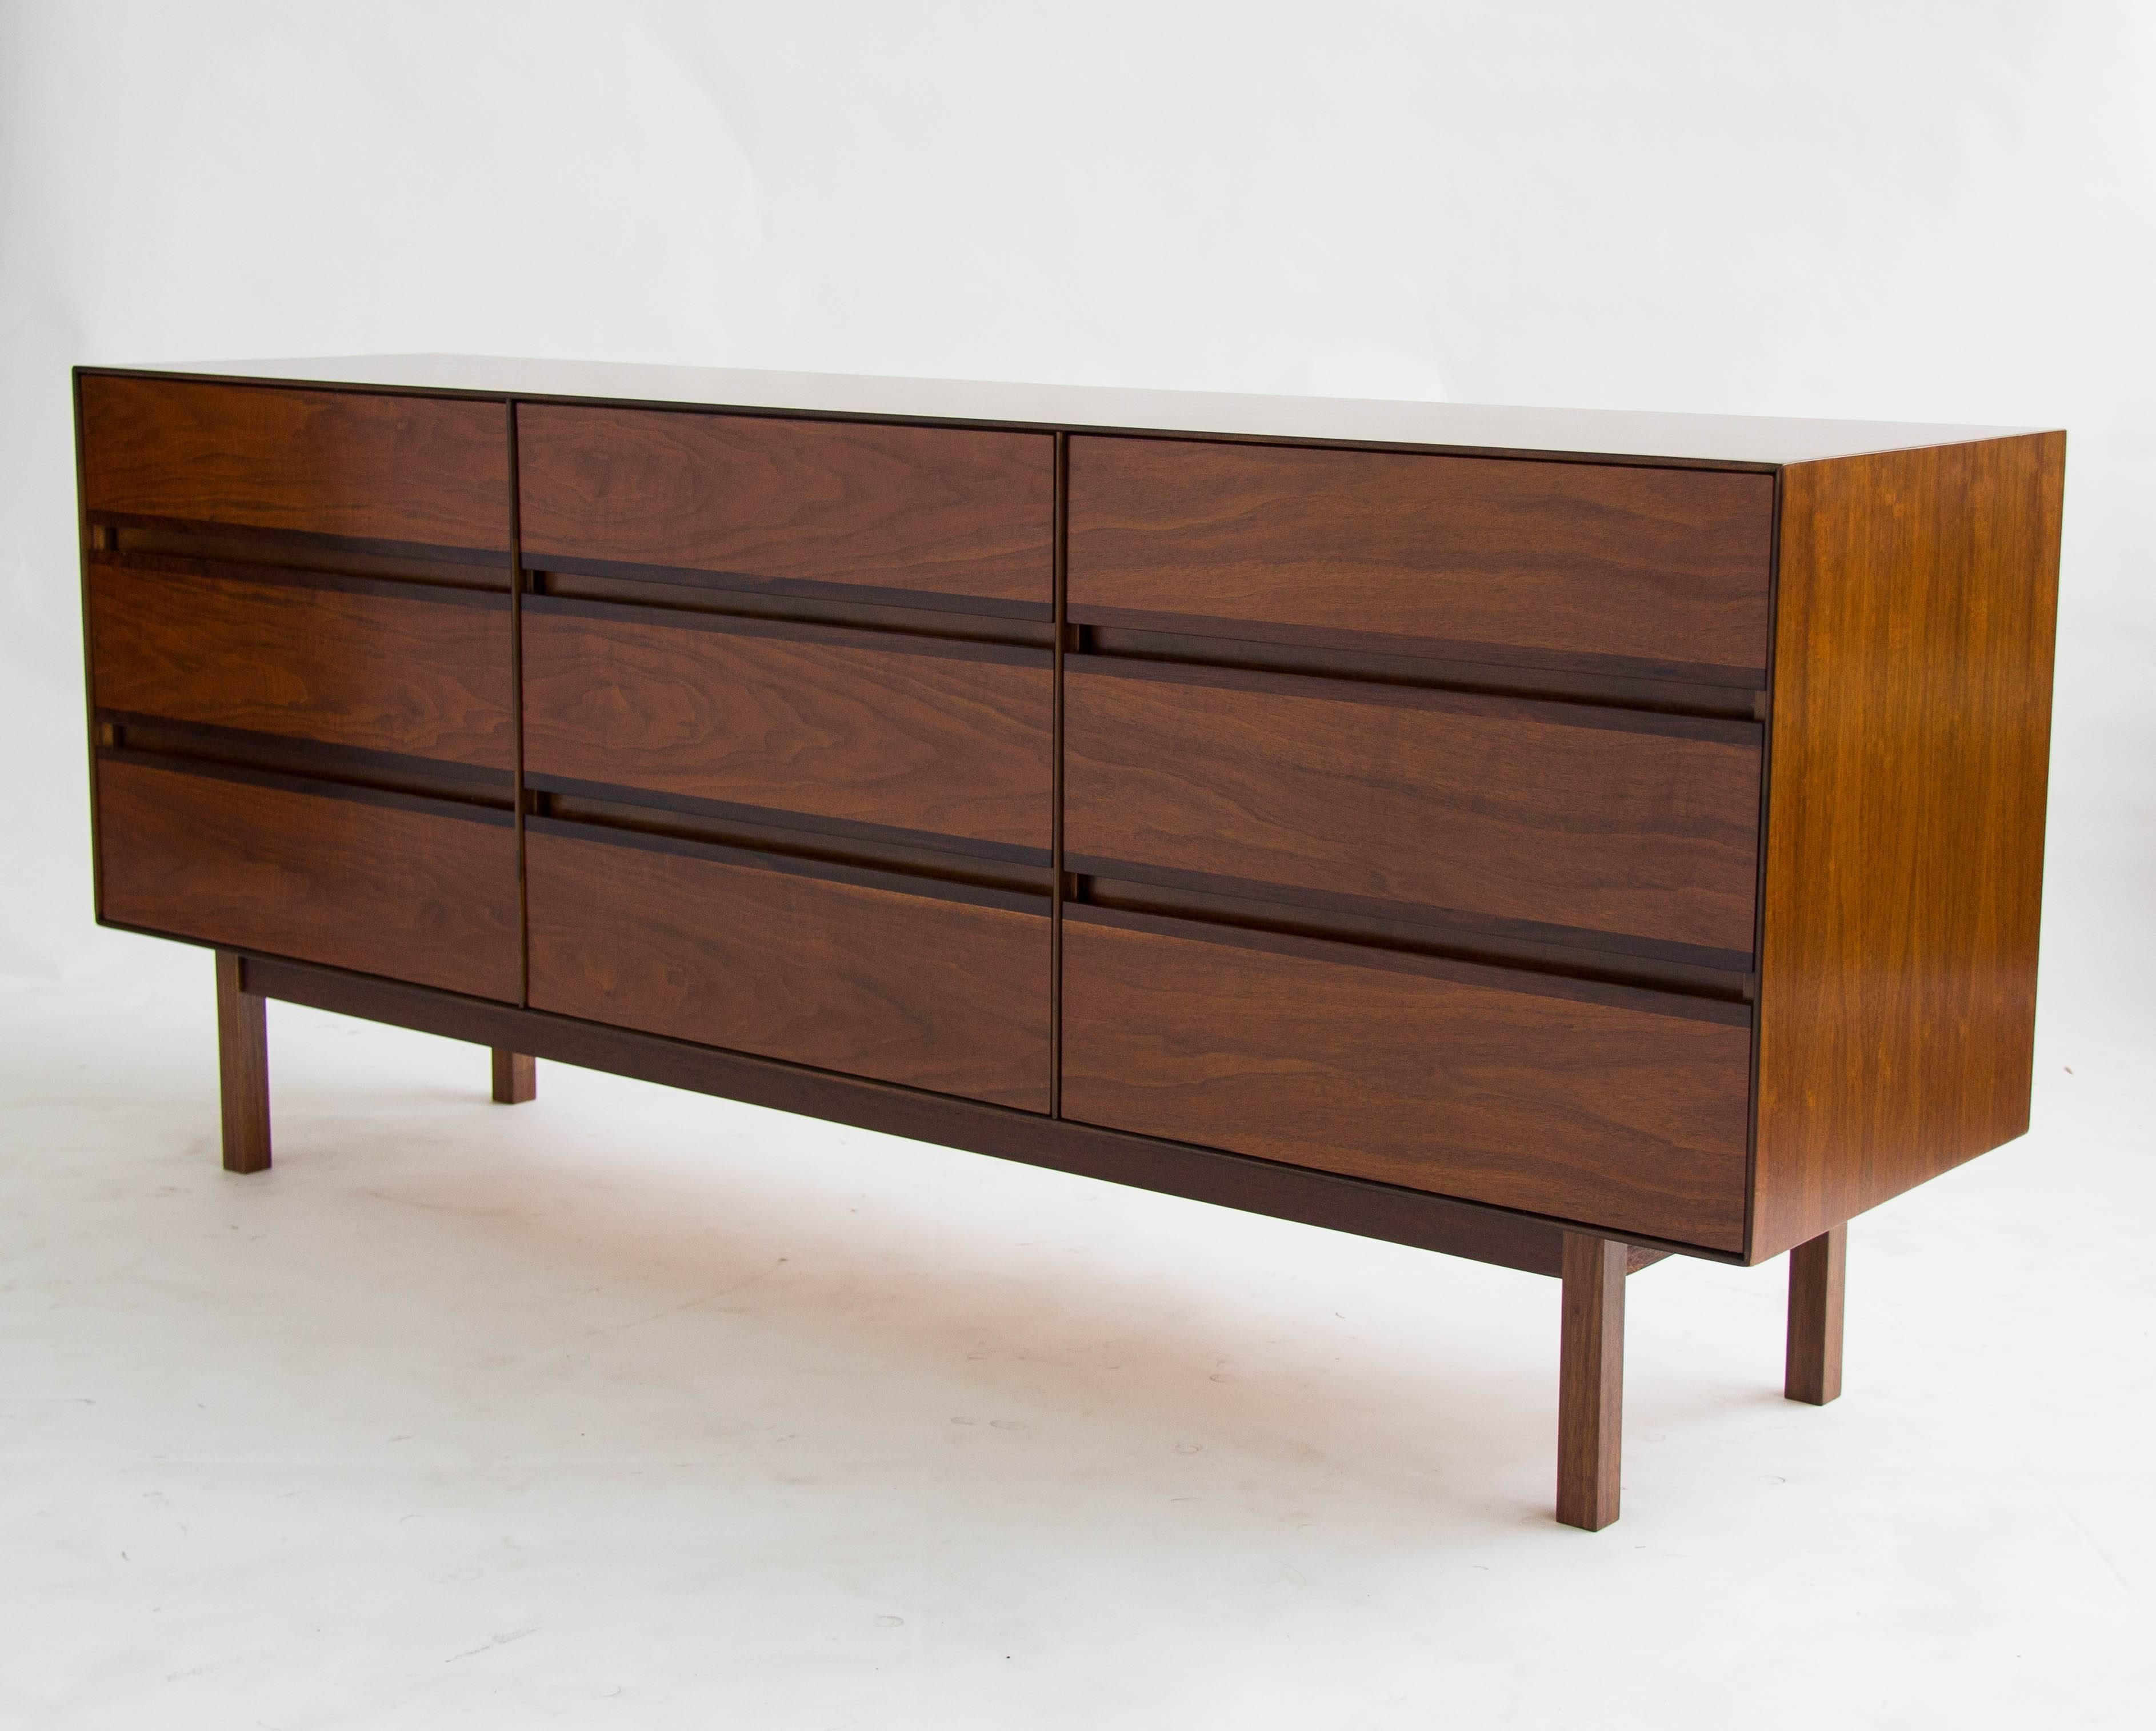 American Walnut and Rosewood Dresser by H. Paul Browning for Stanley Furniture Co